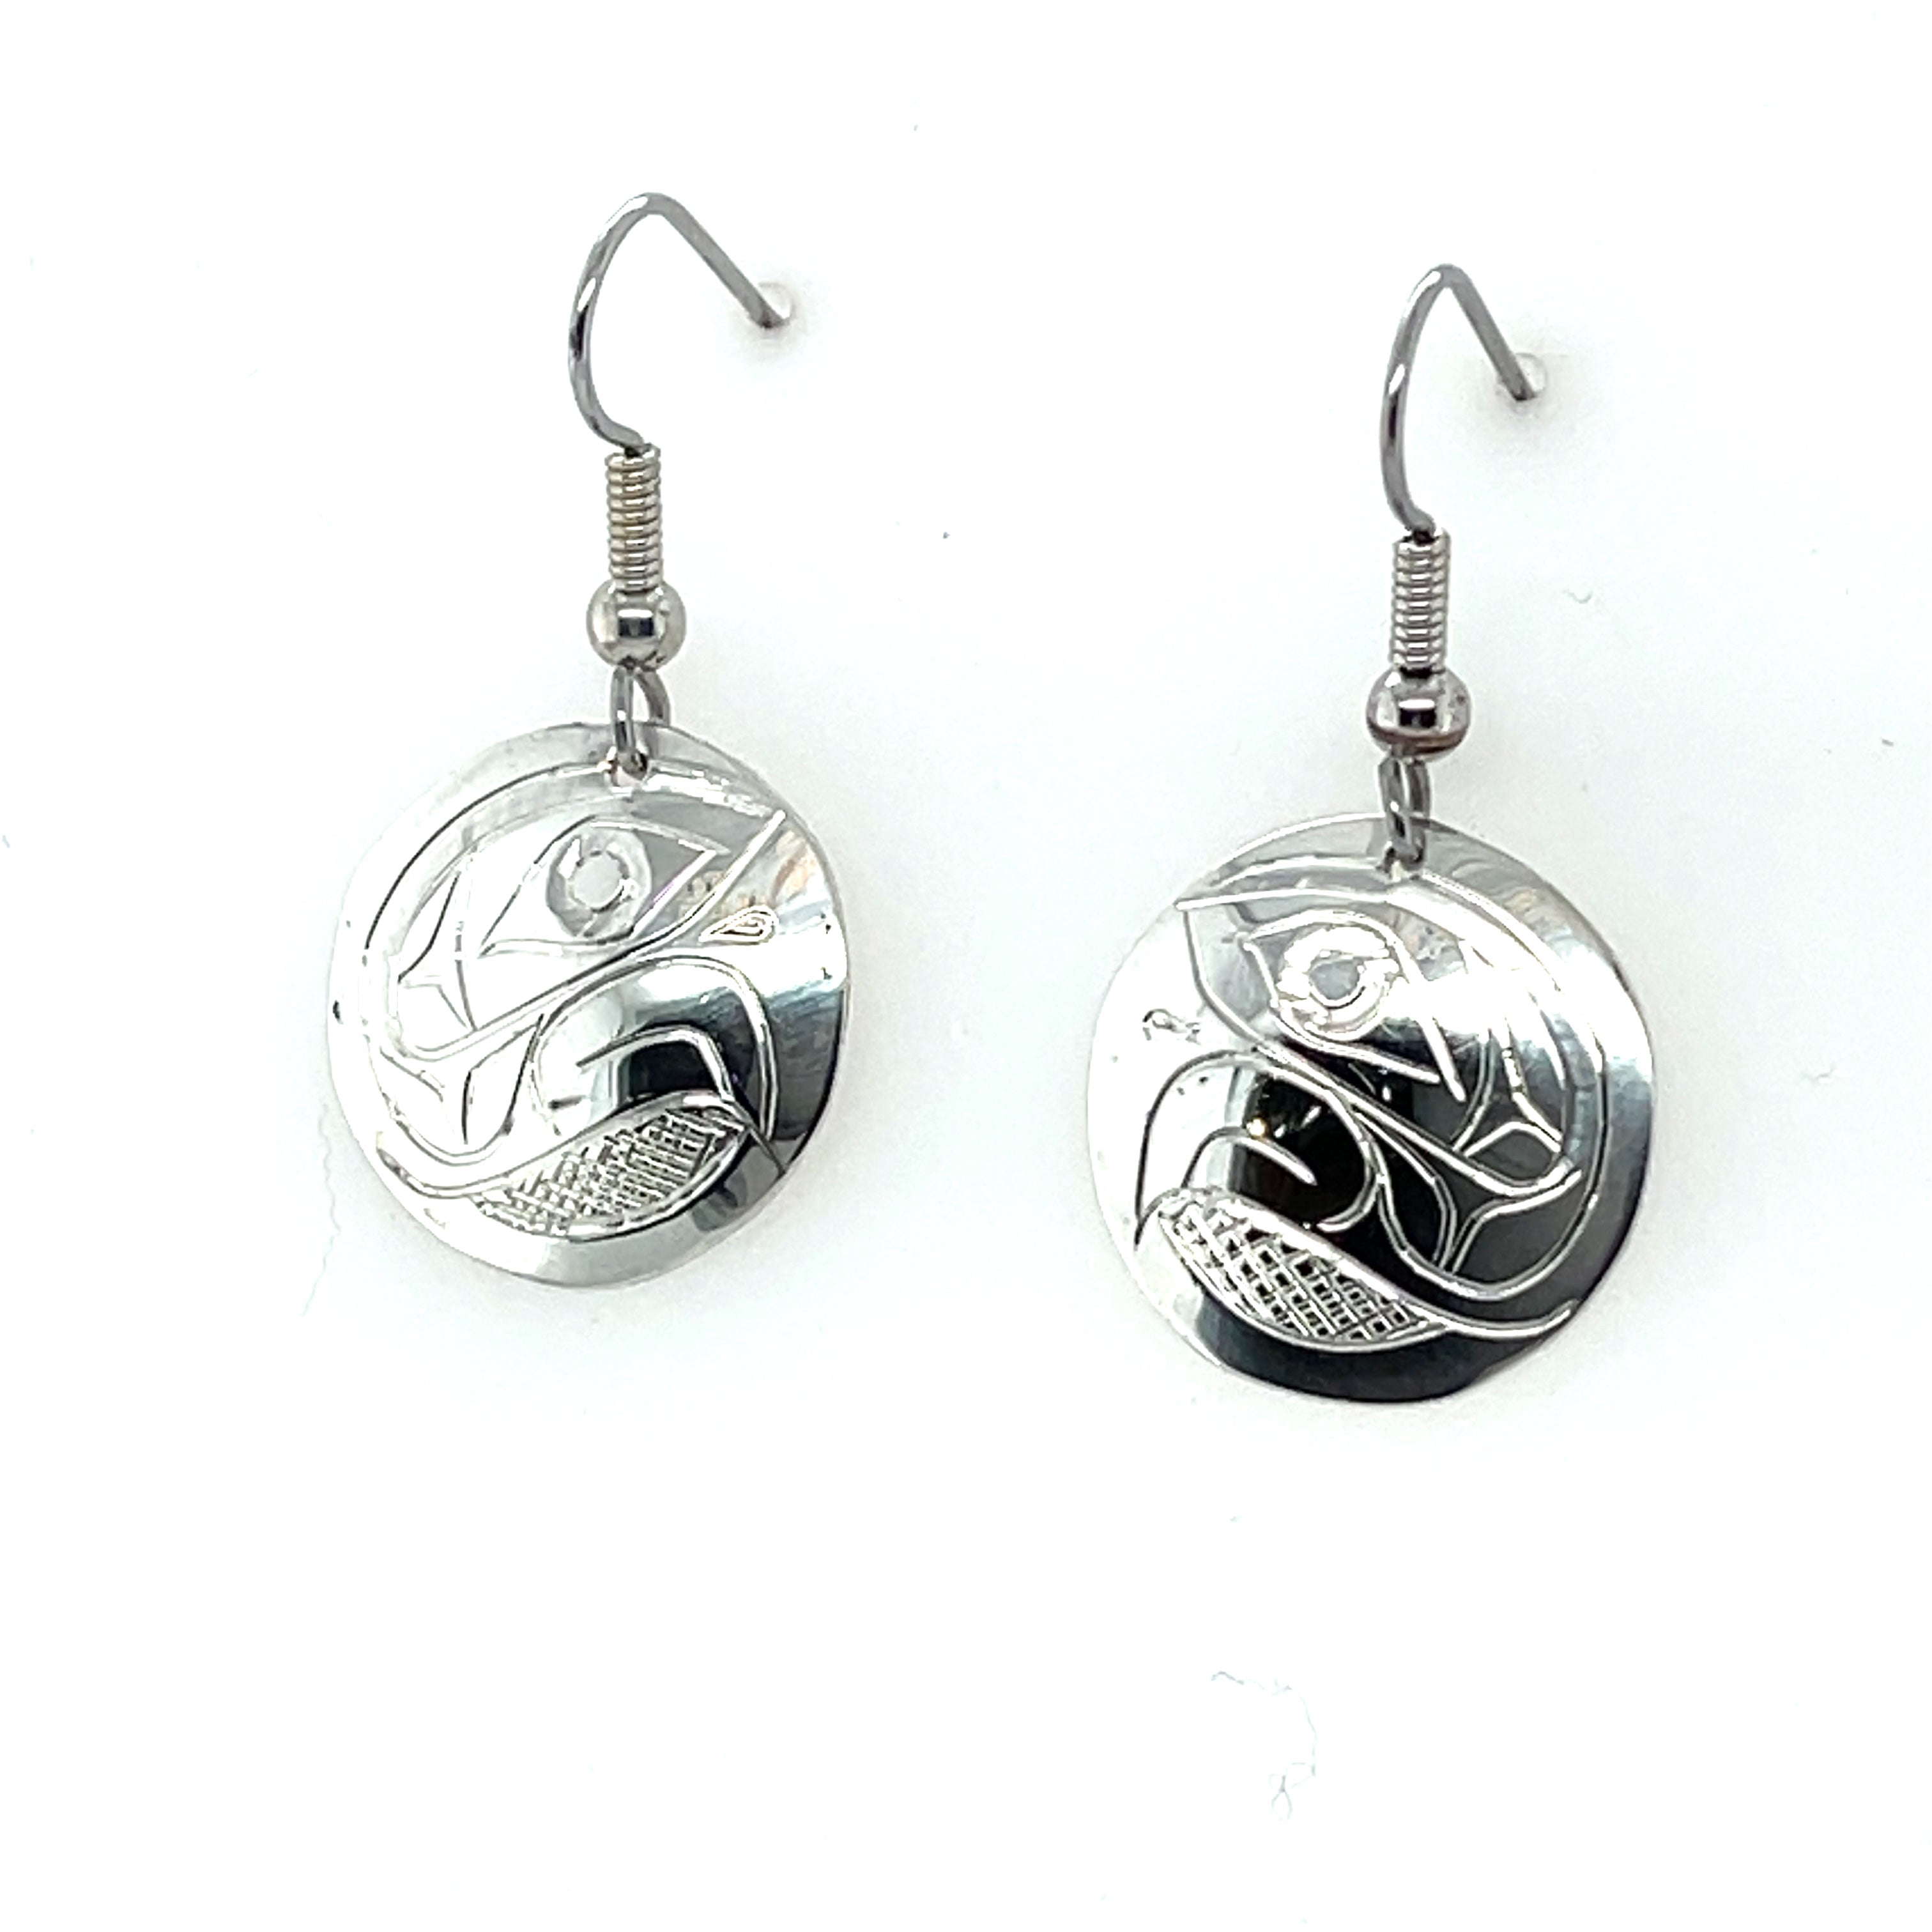 Earrings - Sterling Silver - Round - Eagle